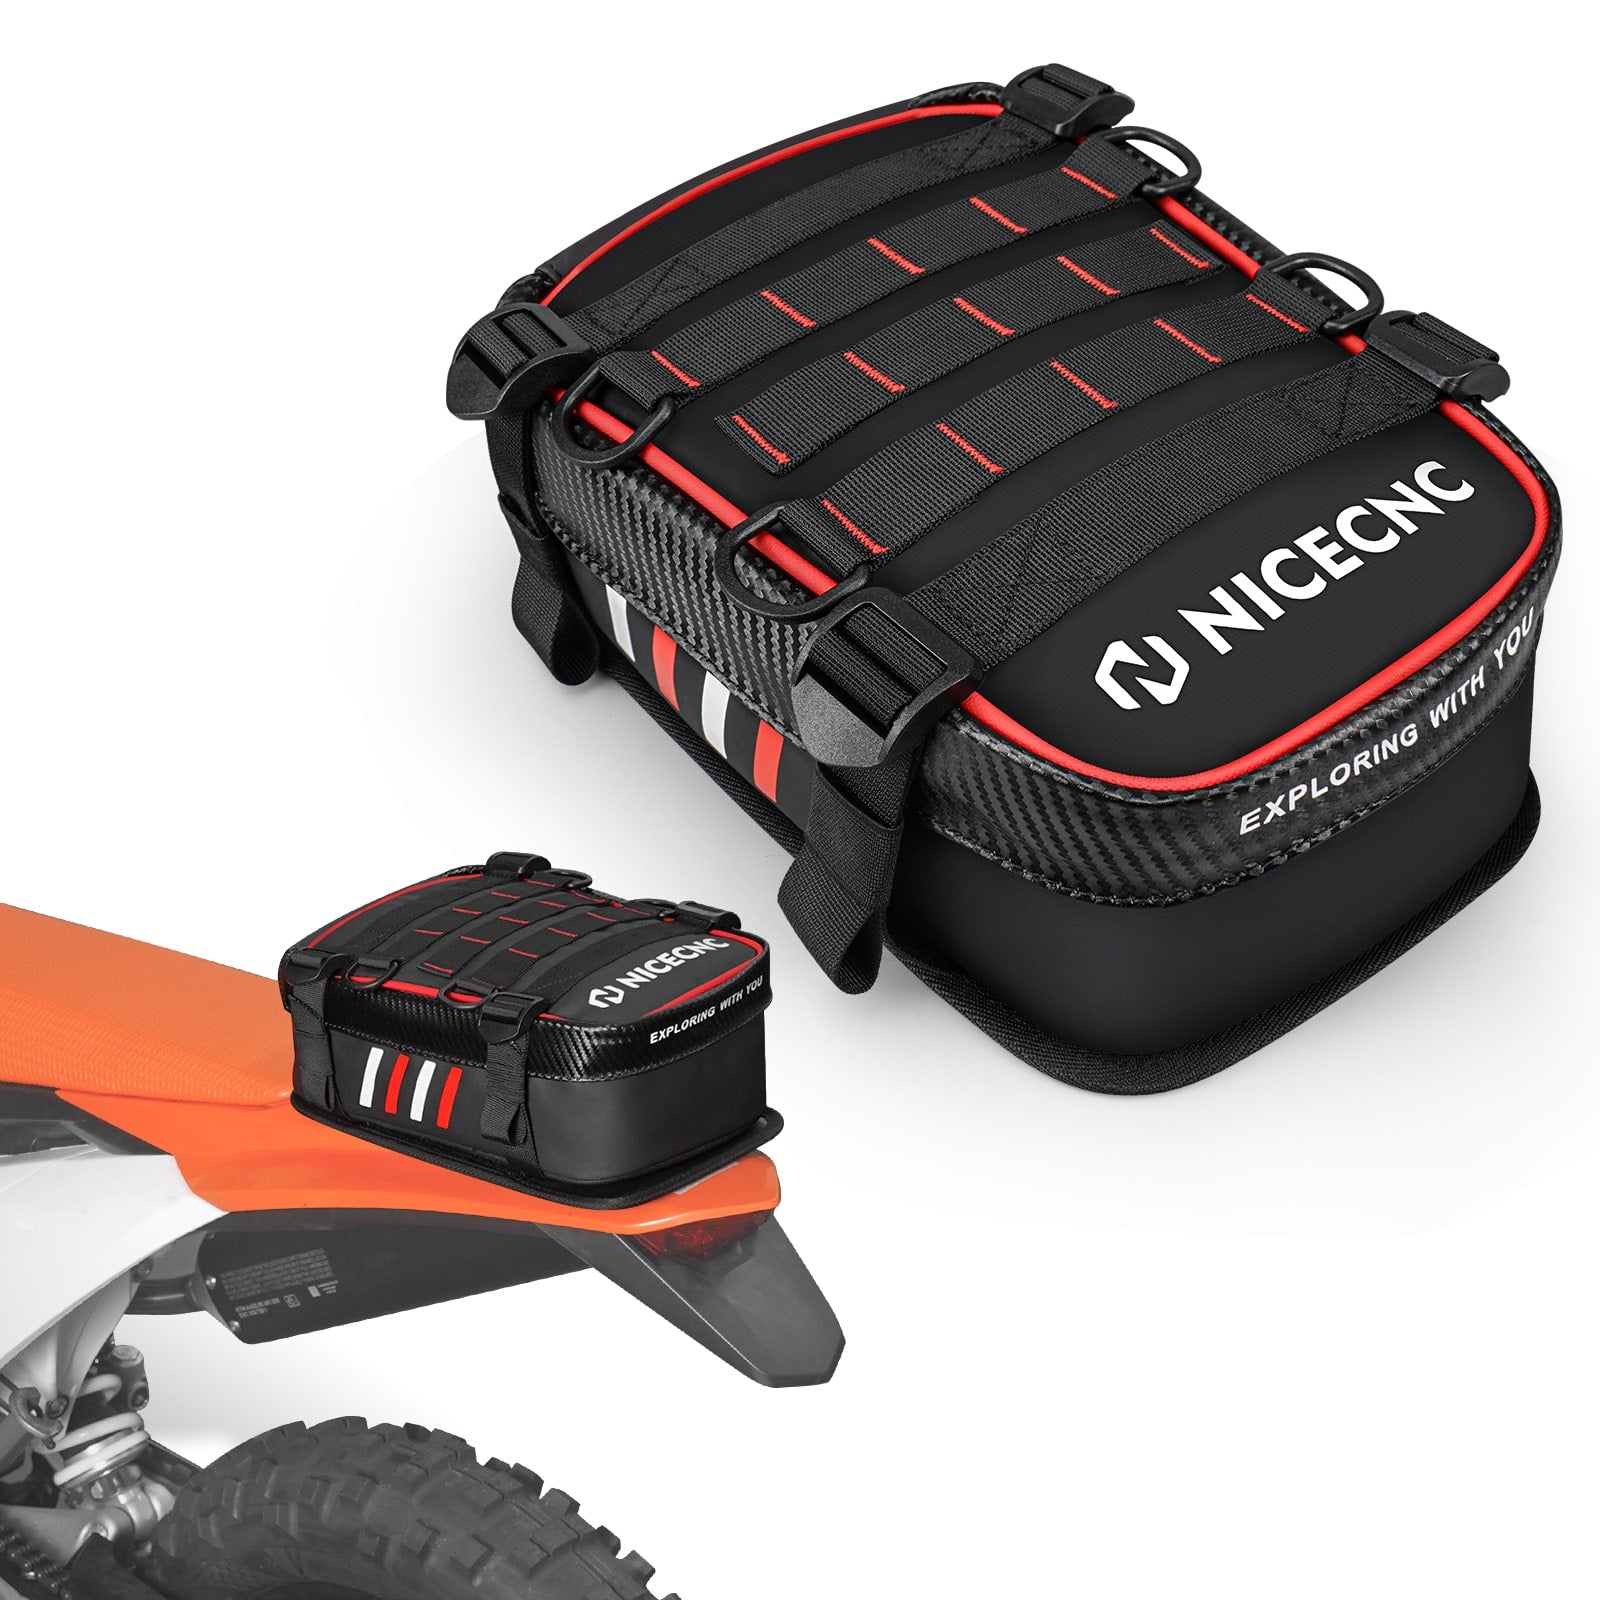 Universal Motorcycle Rear Fender Bag with Tool Roll Bag For Dirt Bike Adventure Off-road Riding